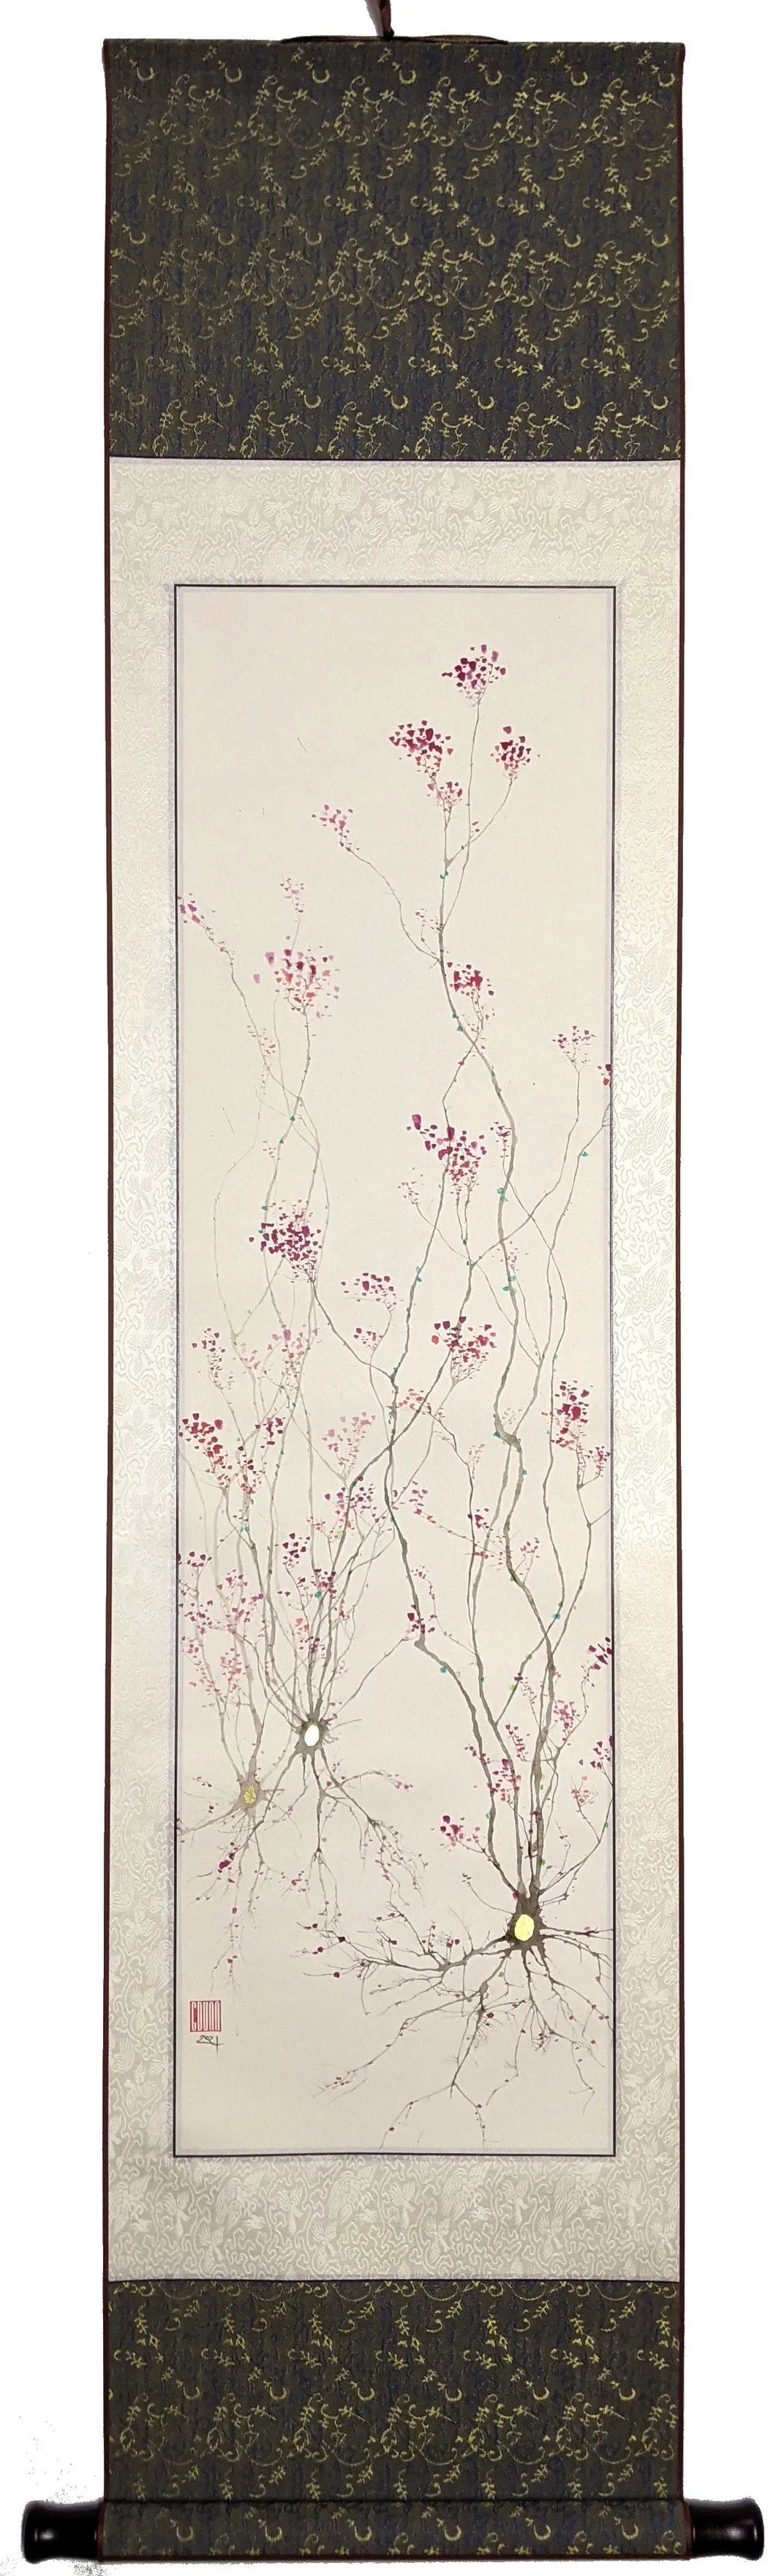 Hanging Scroll Depicting Golden Neurons Surrounded by Flower Petals